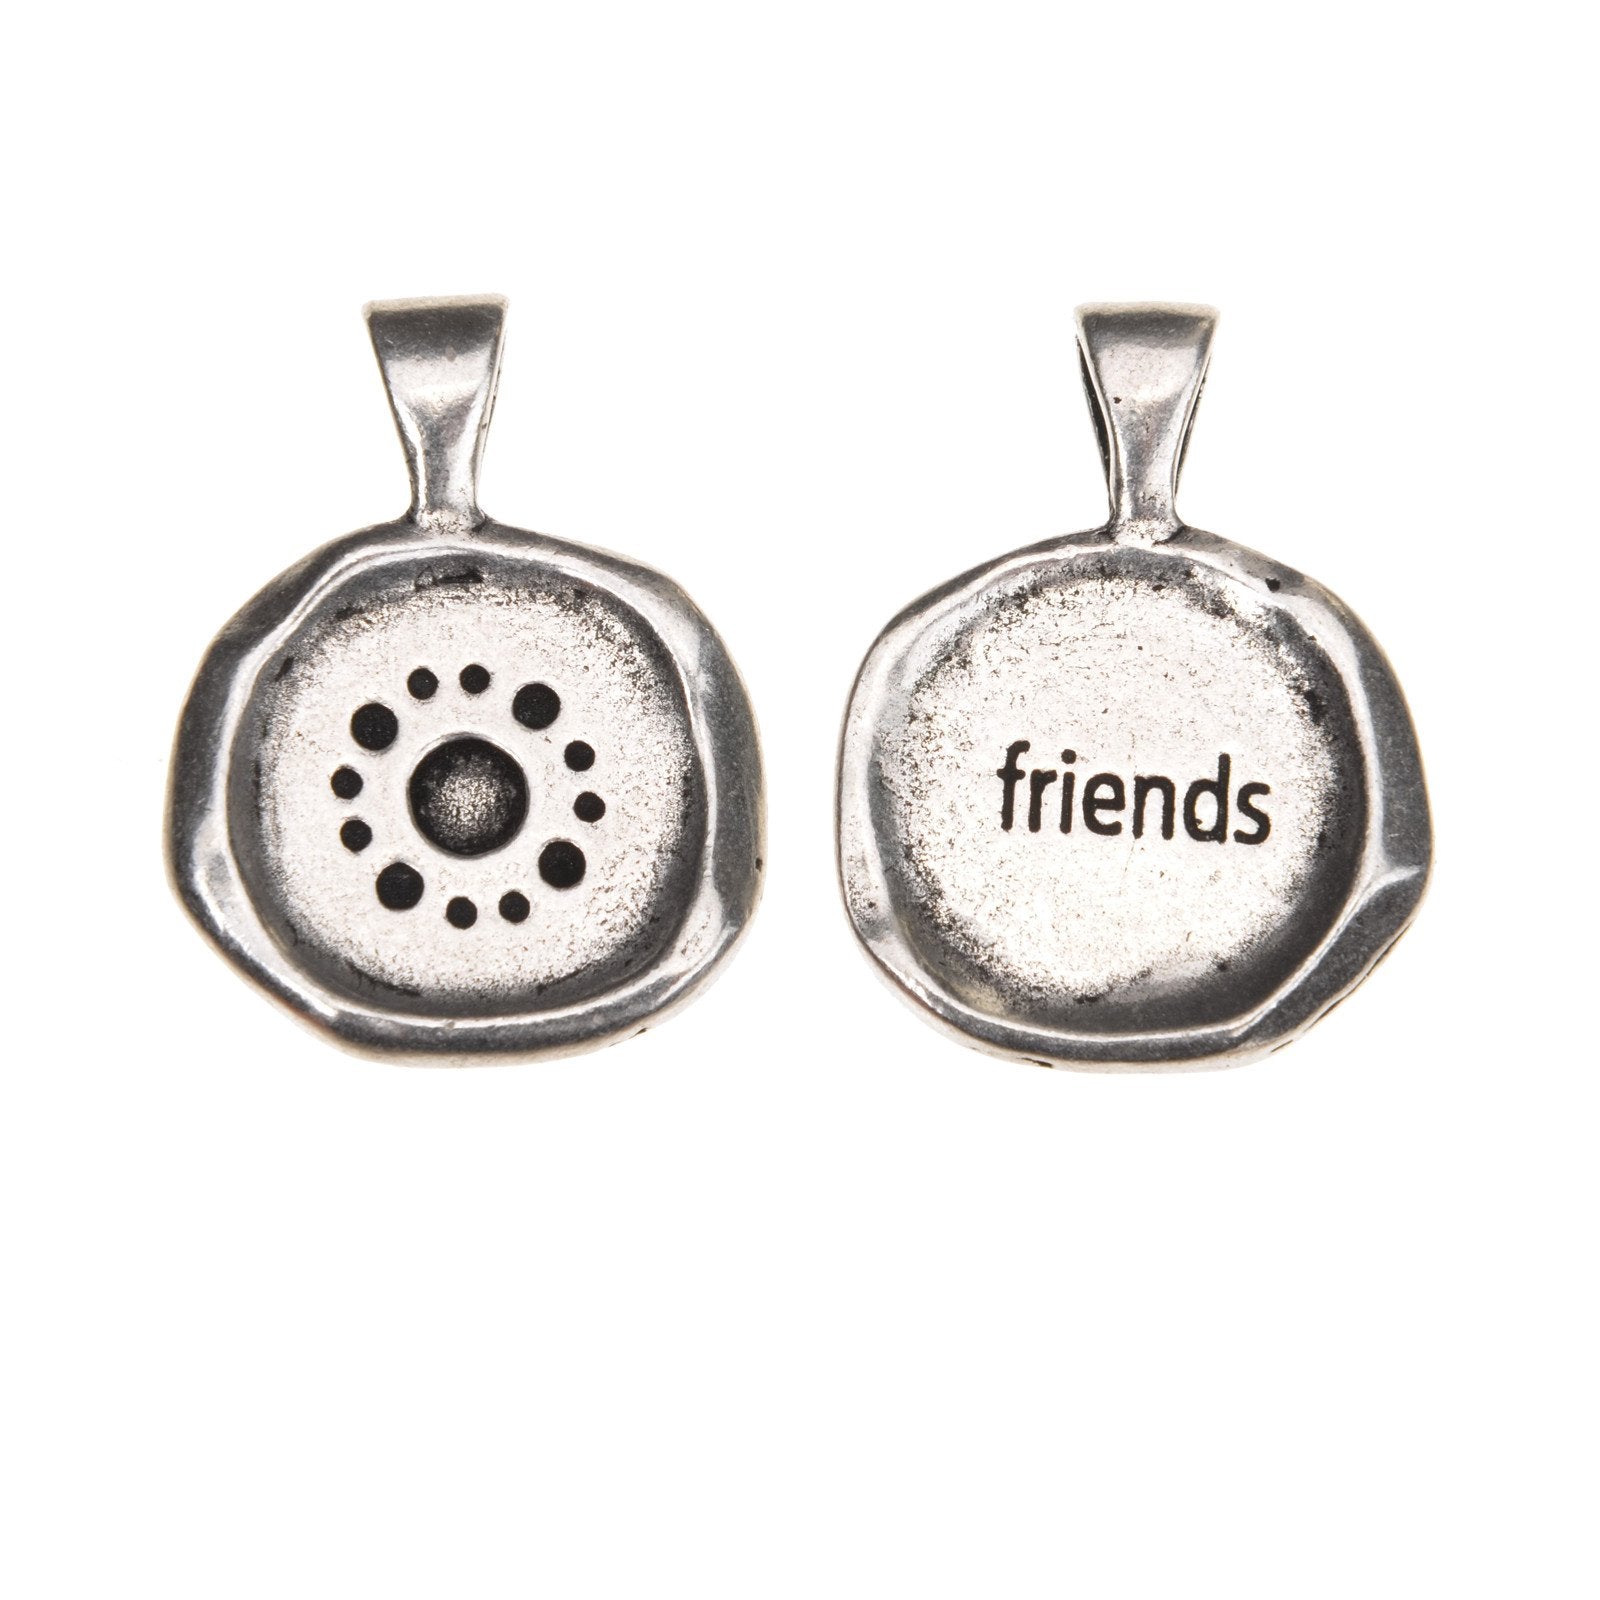 Friends Wax Seal front and back